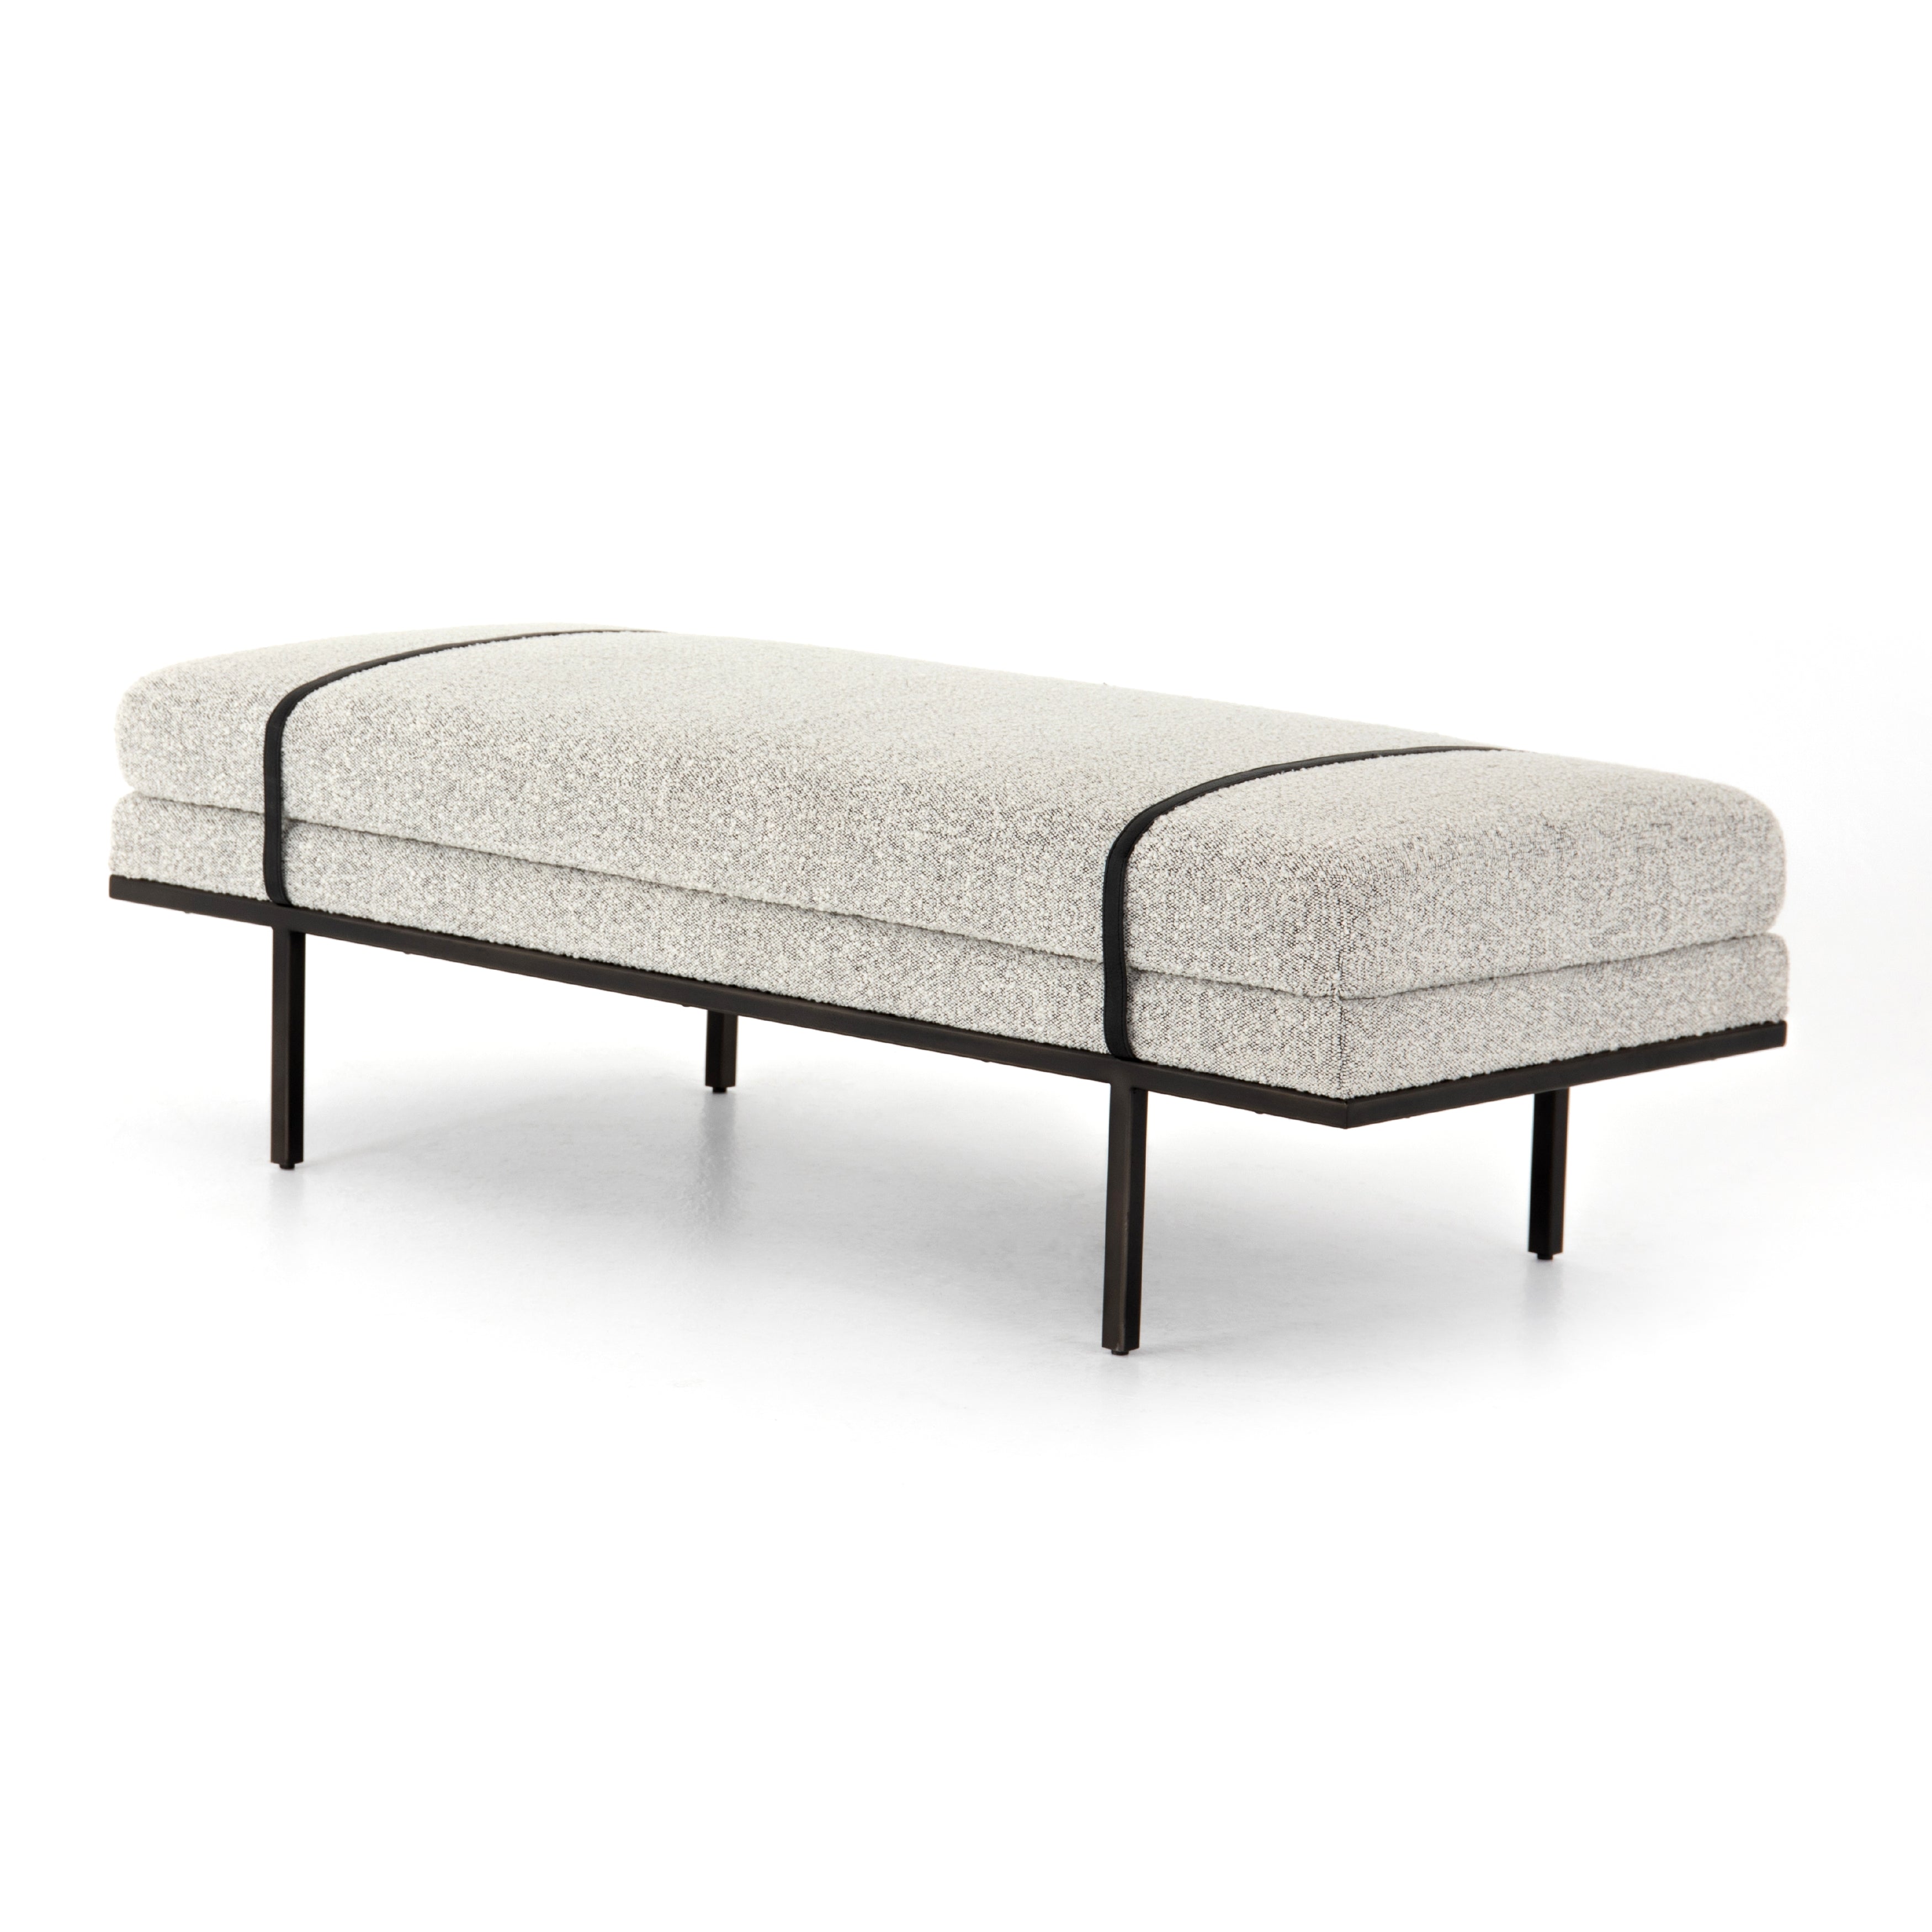 HARRISON ACCENT BENCH - KNOLL DOMINO